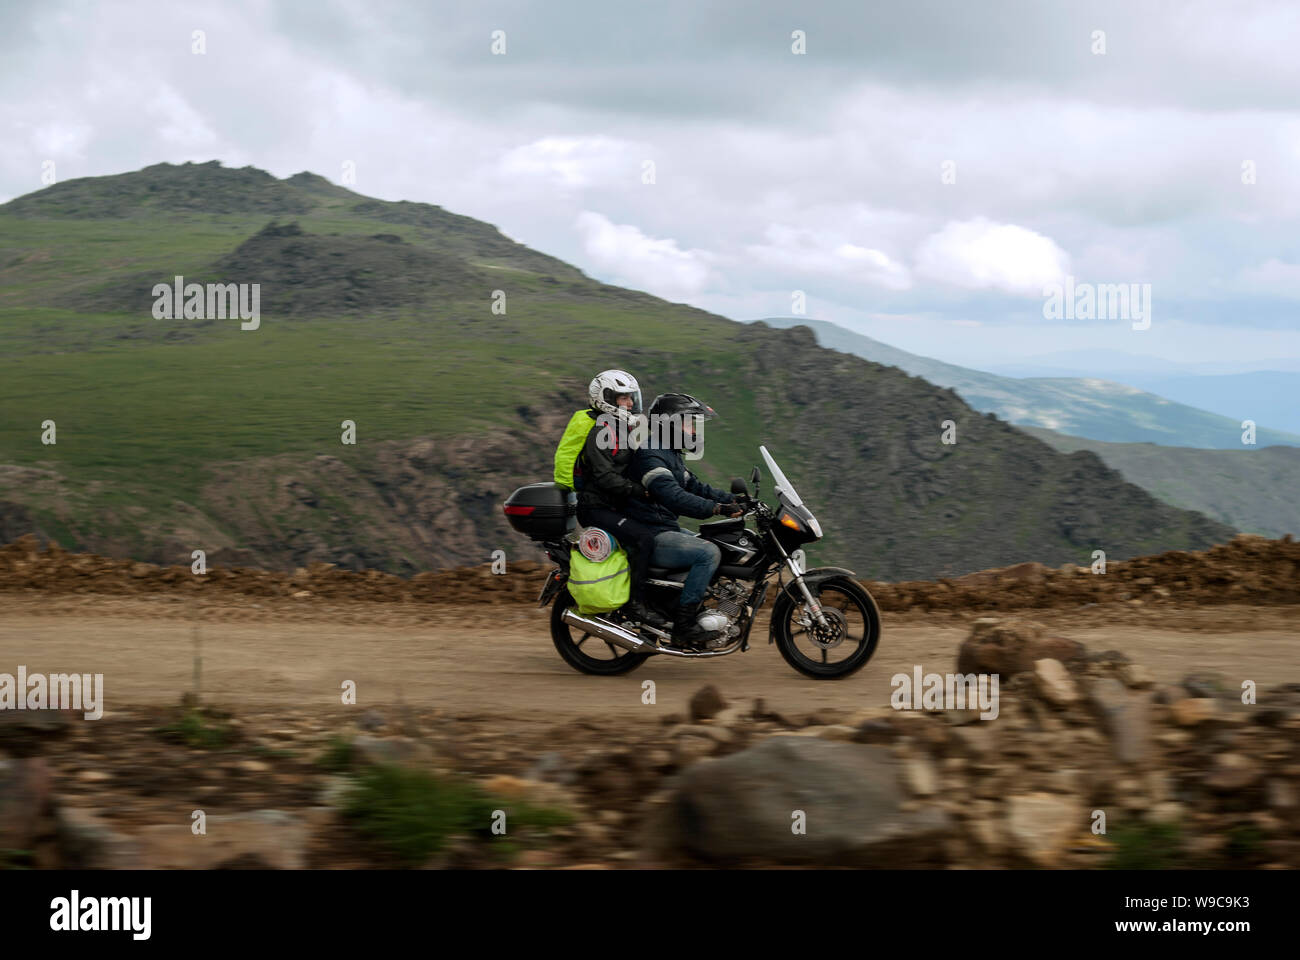 Russia, Sverdlovsk Oblast - July 19, 2018: two travelers on a motorcycle rushes down the mountain road Stock Photo